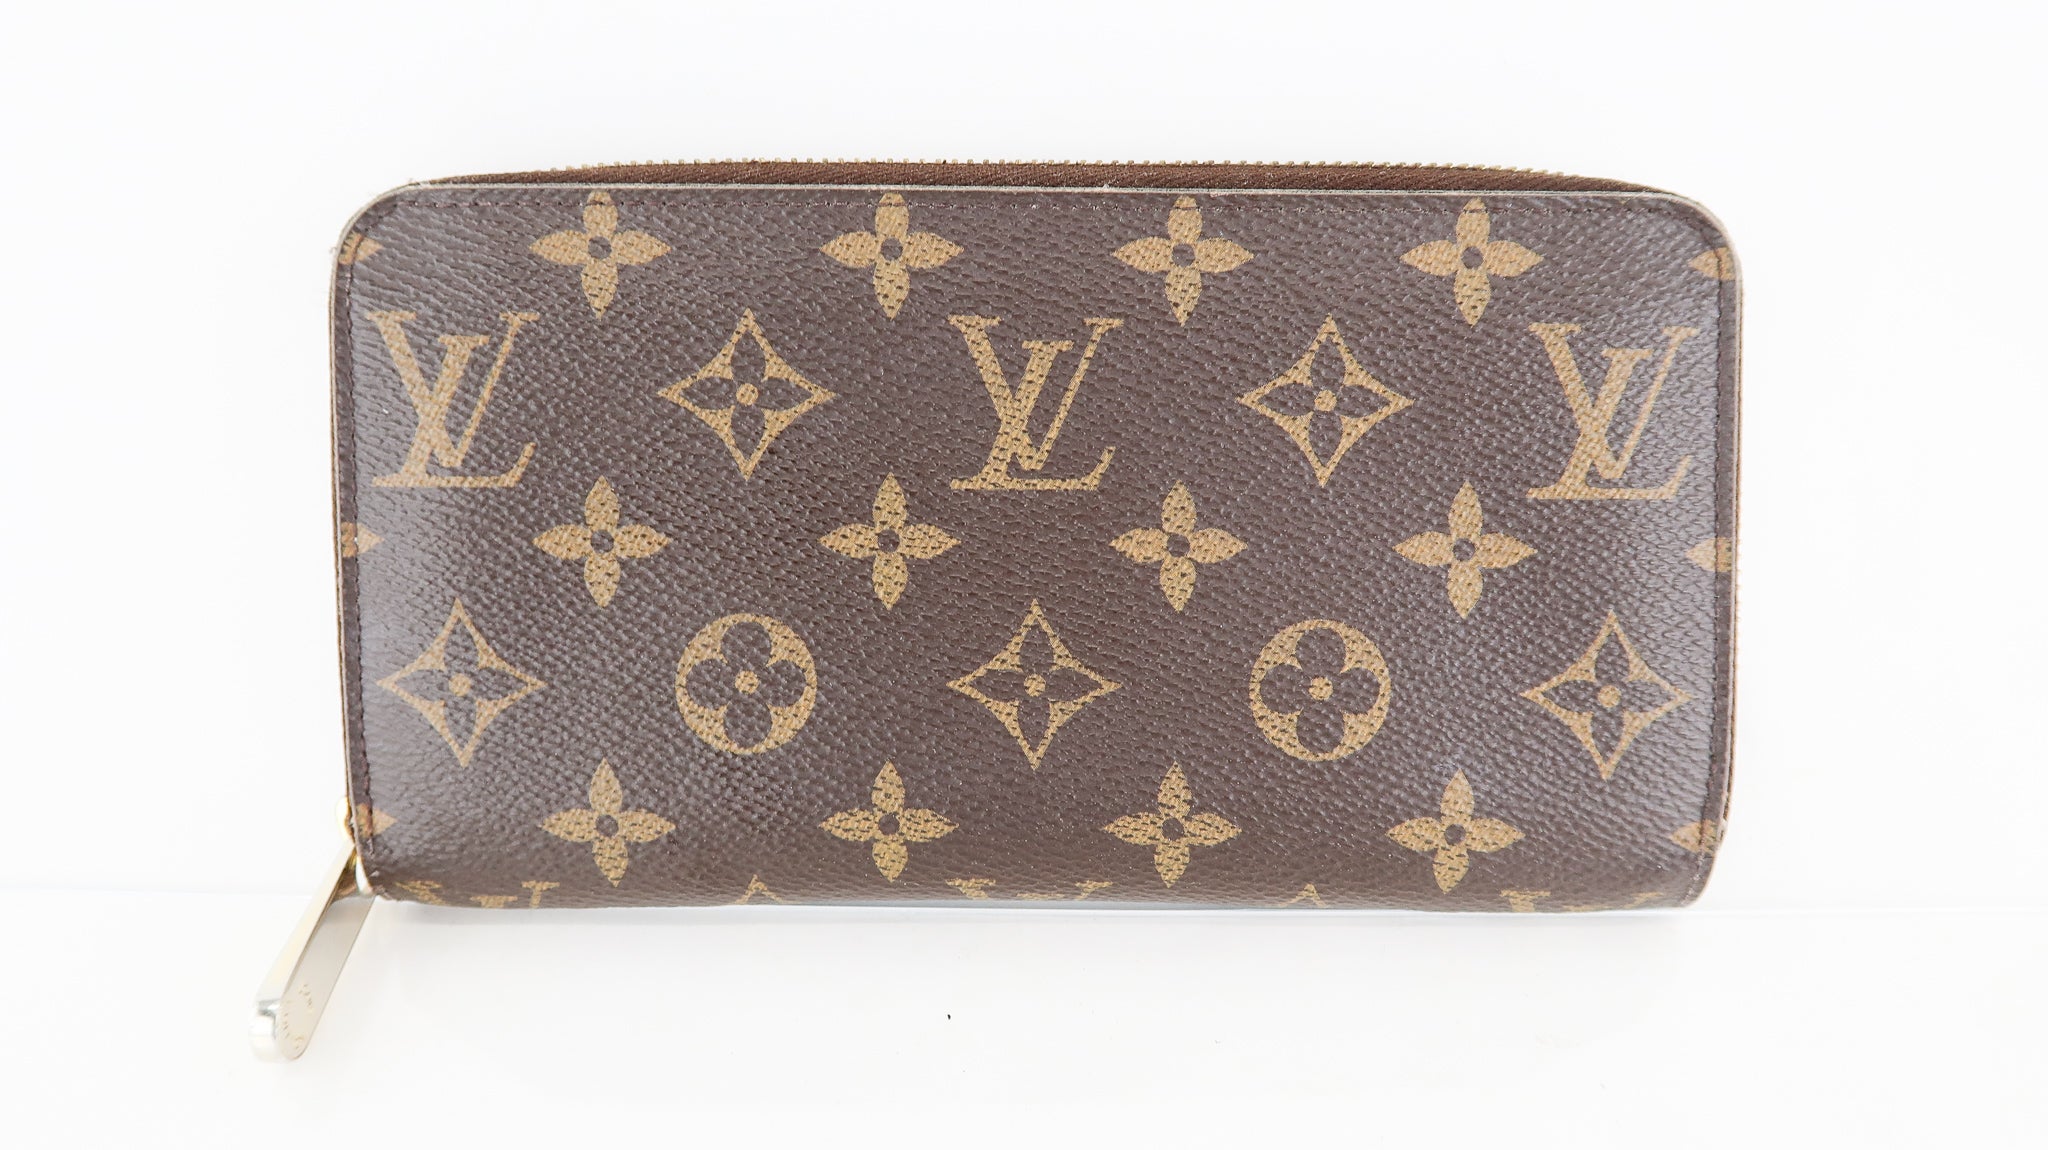 Authentic Louis Vuitton Classic Monogram Canvas Zippy with Rose Pink Interior Wallet